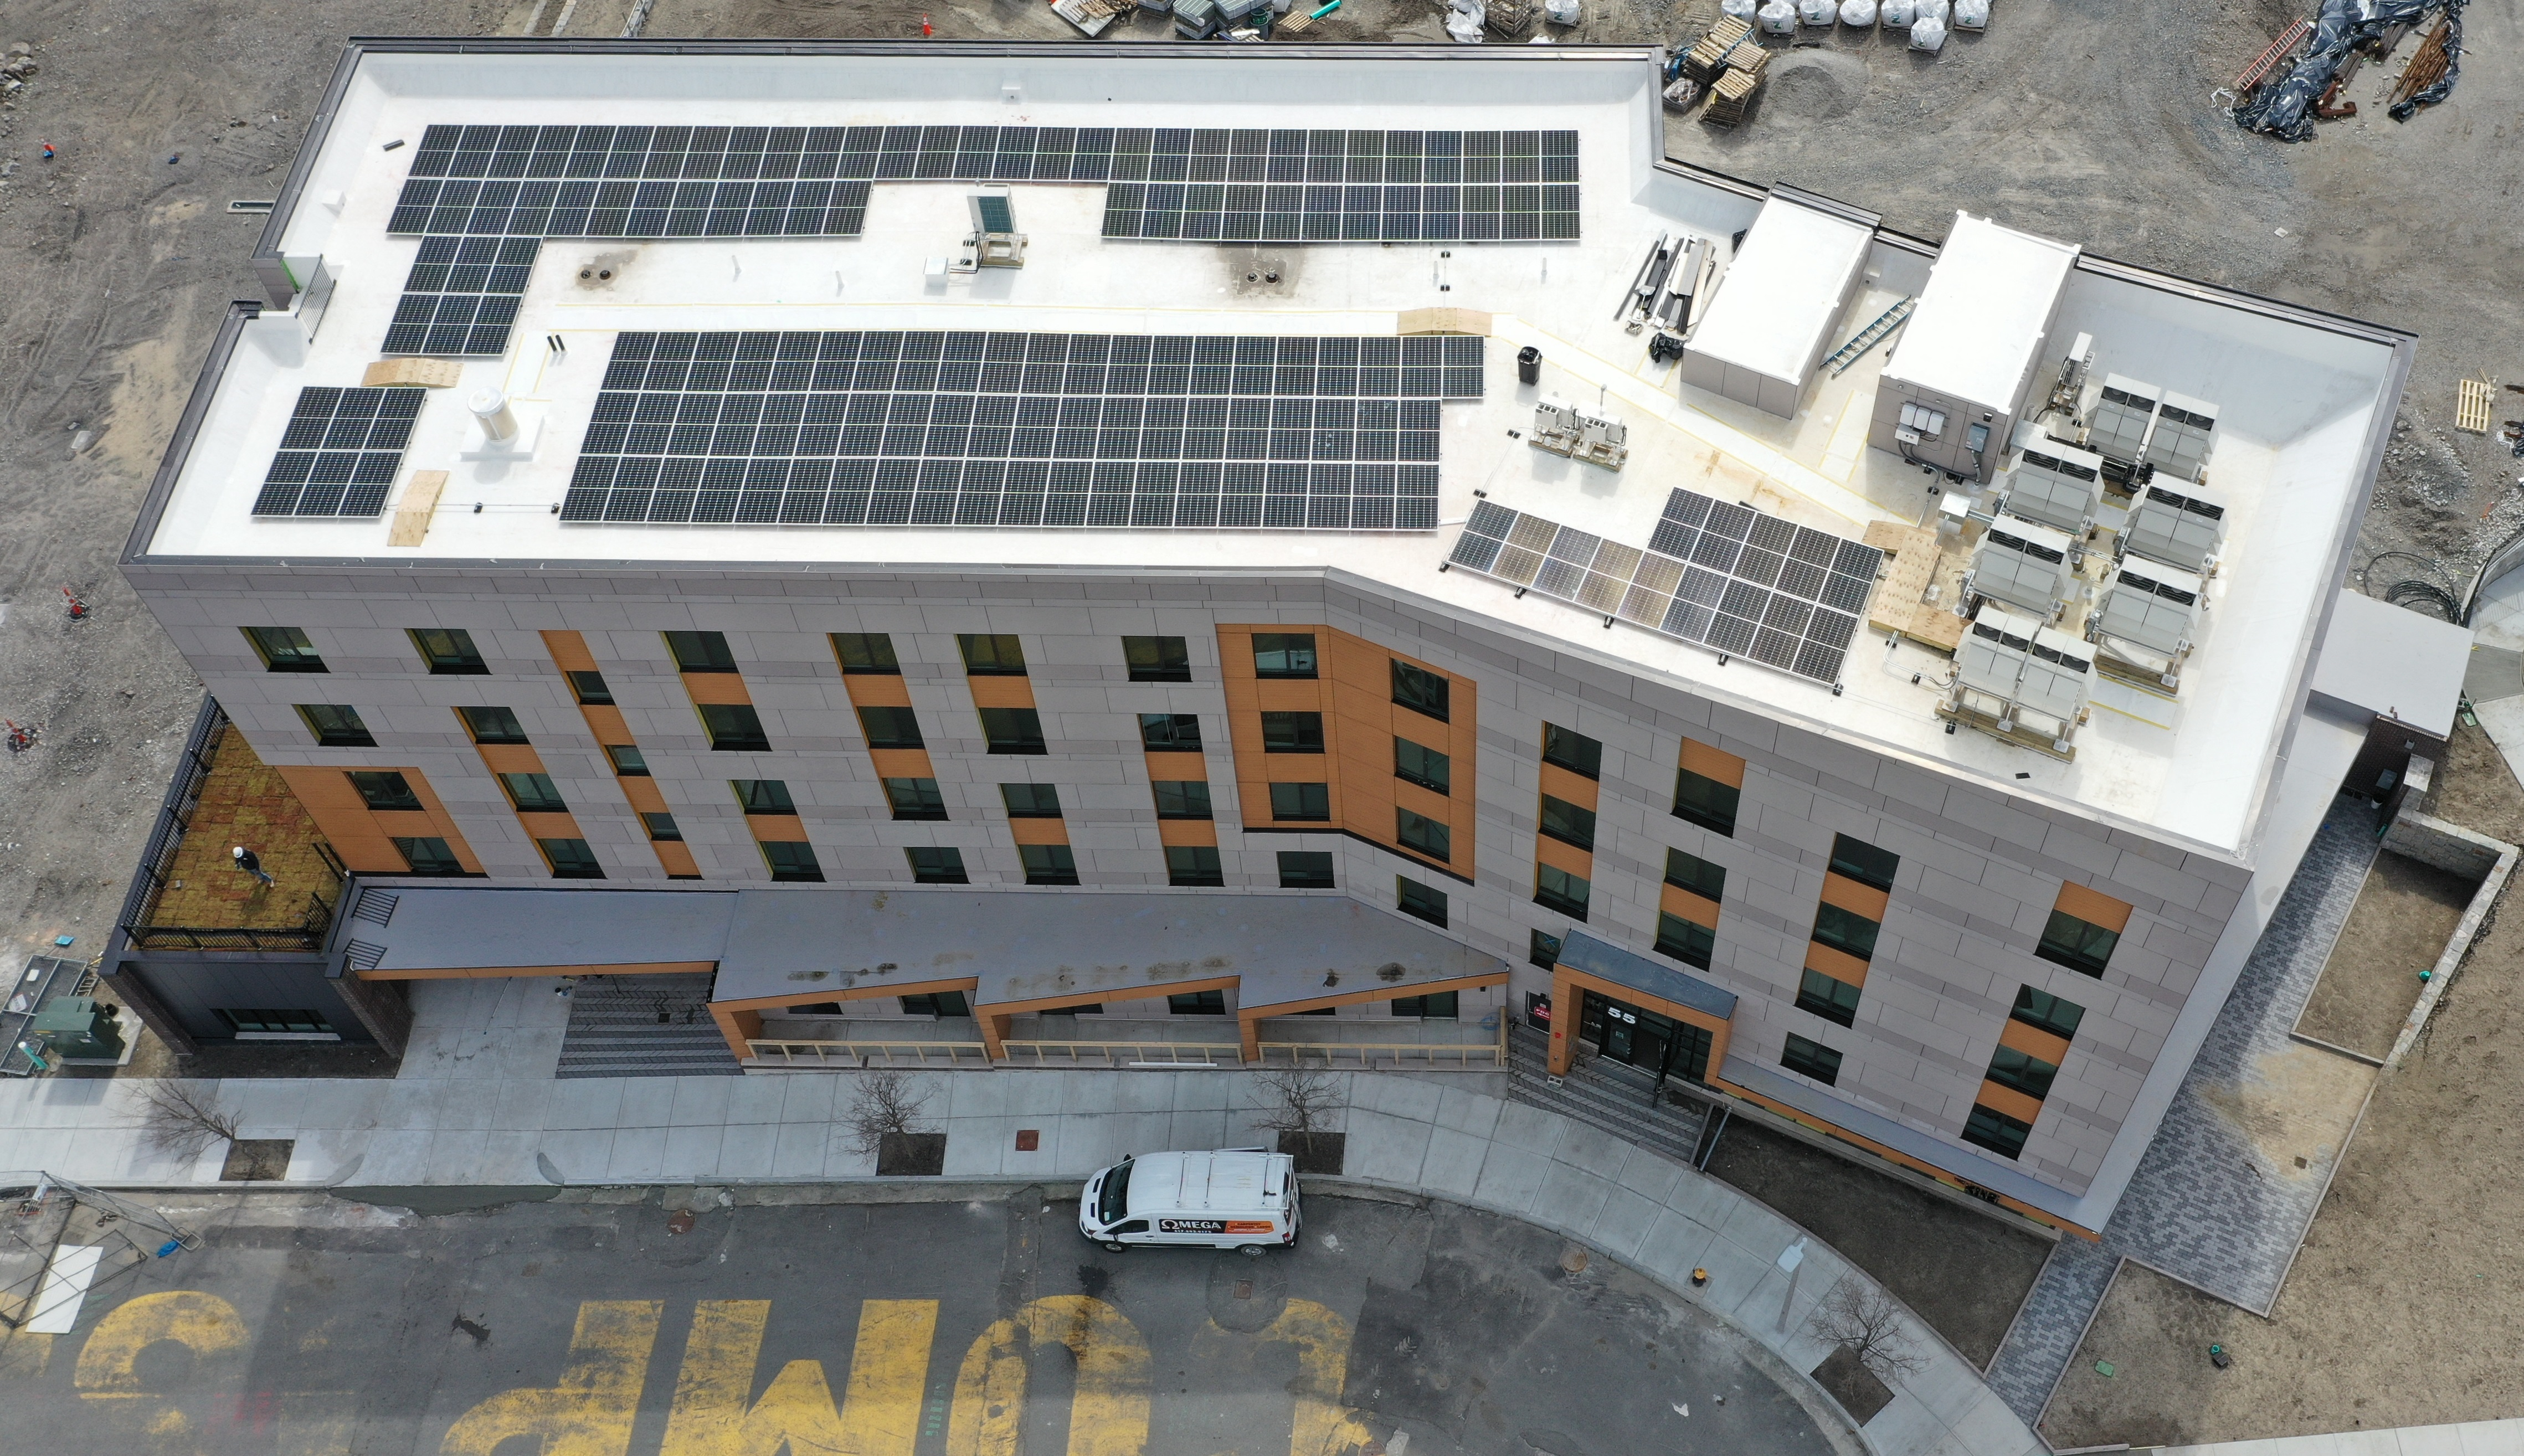 Aerial view of 4-story apartment building with solar panels on roof